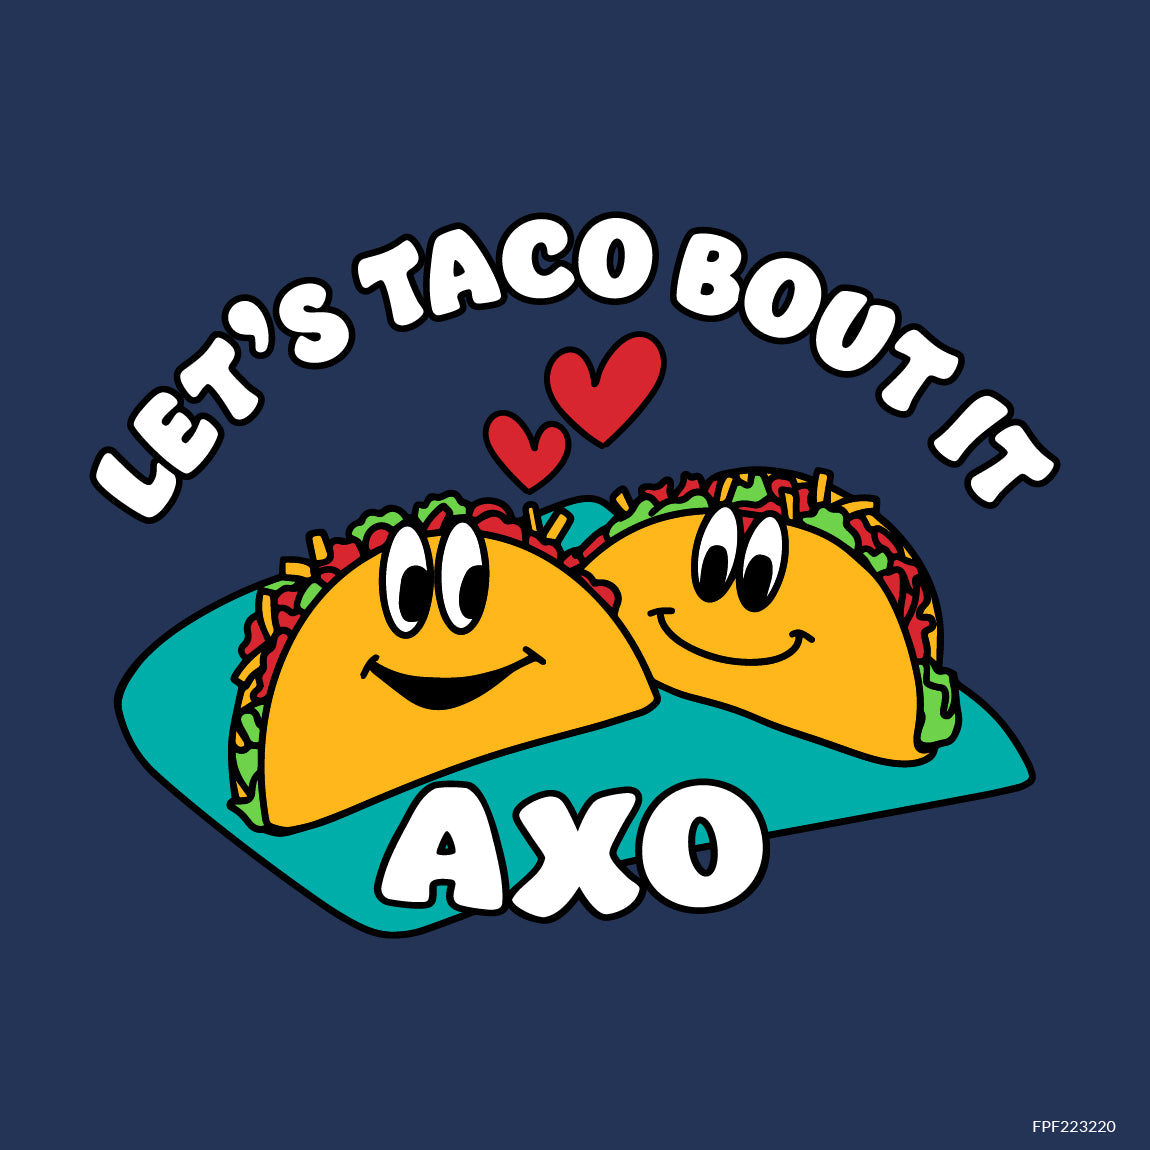 Let's Taco Bout It